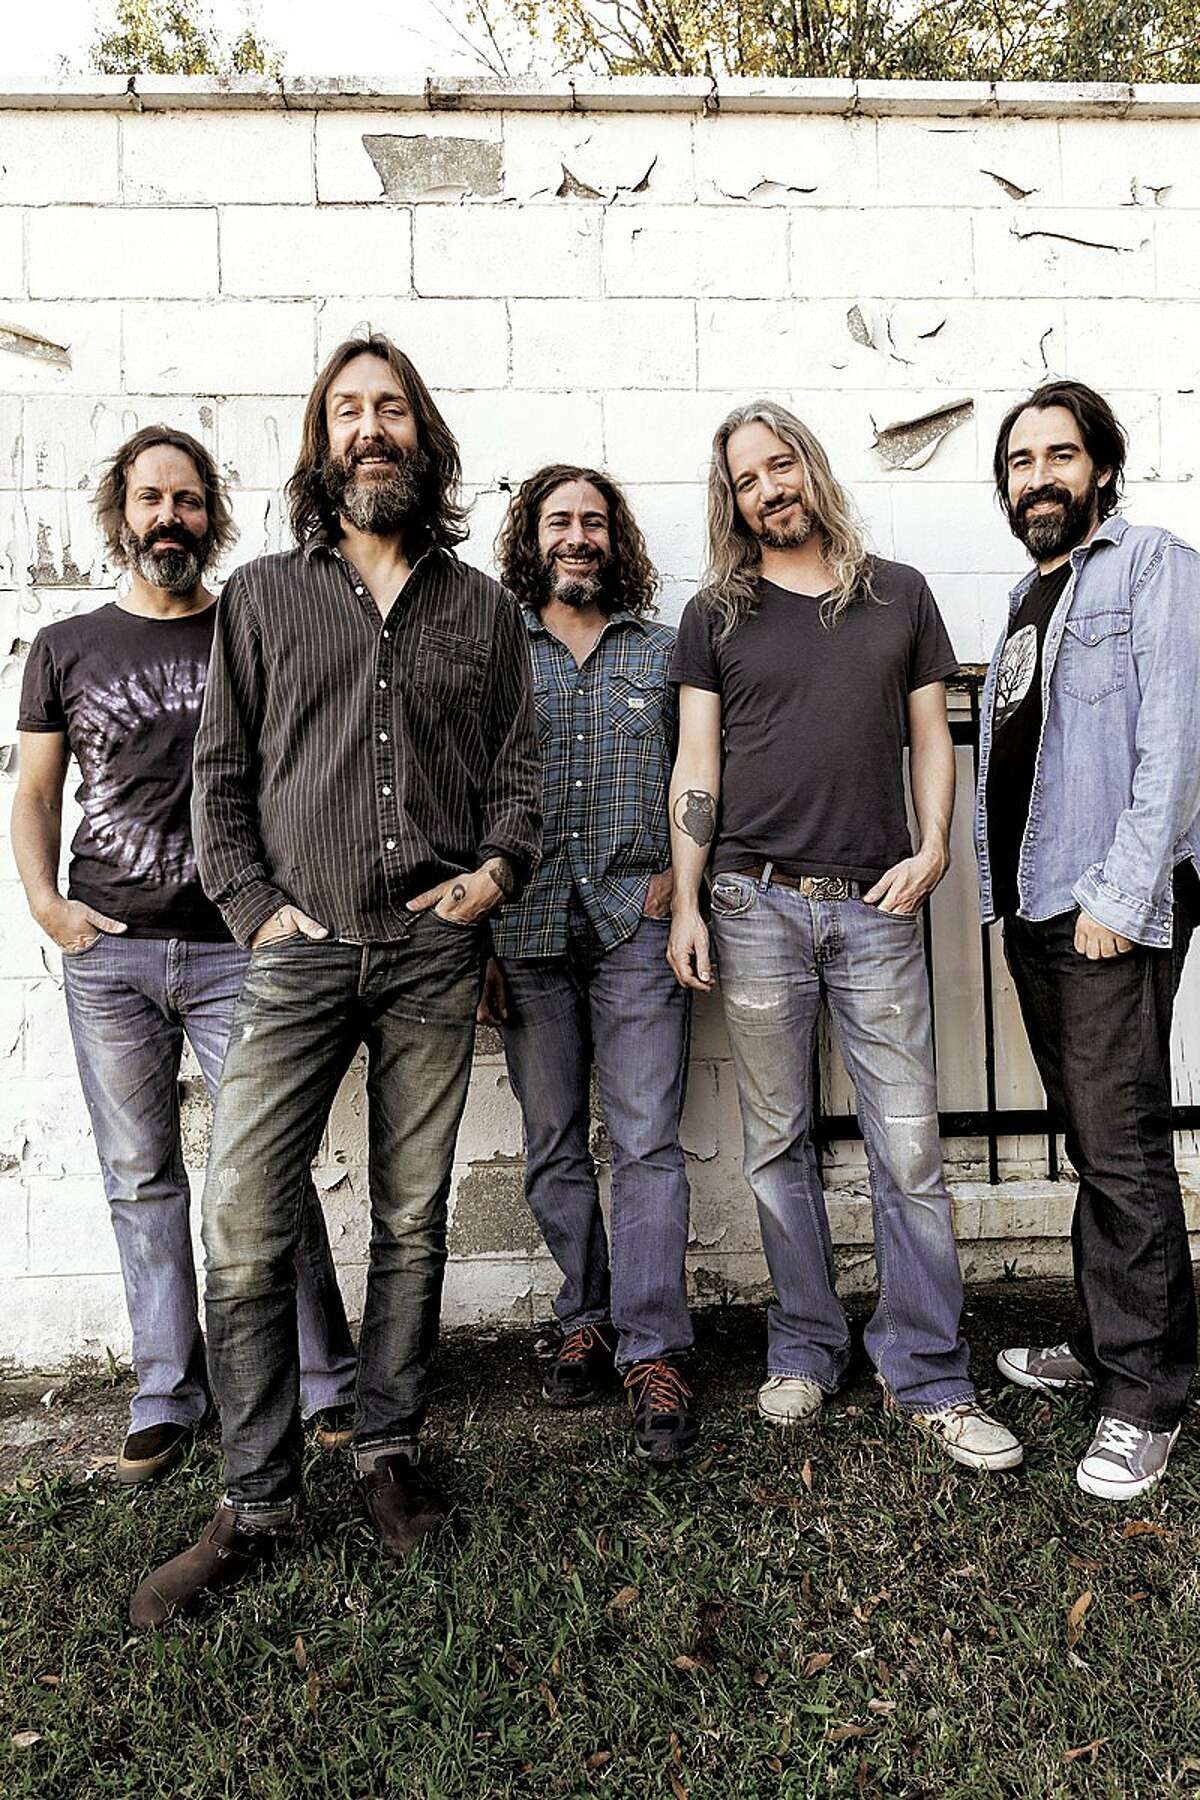 The Chris Robinson Brotherhood plays the Fillmore Auditorium in San Francisco Thurs. through Sat., Dec. 8-10, 2016, �in support of their new release "If You Lived Here, You Would Be Home By Now."